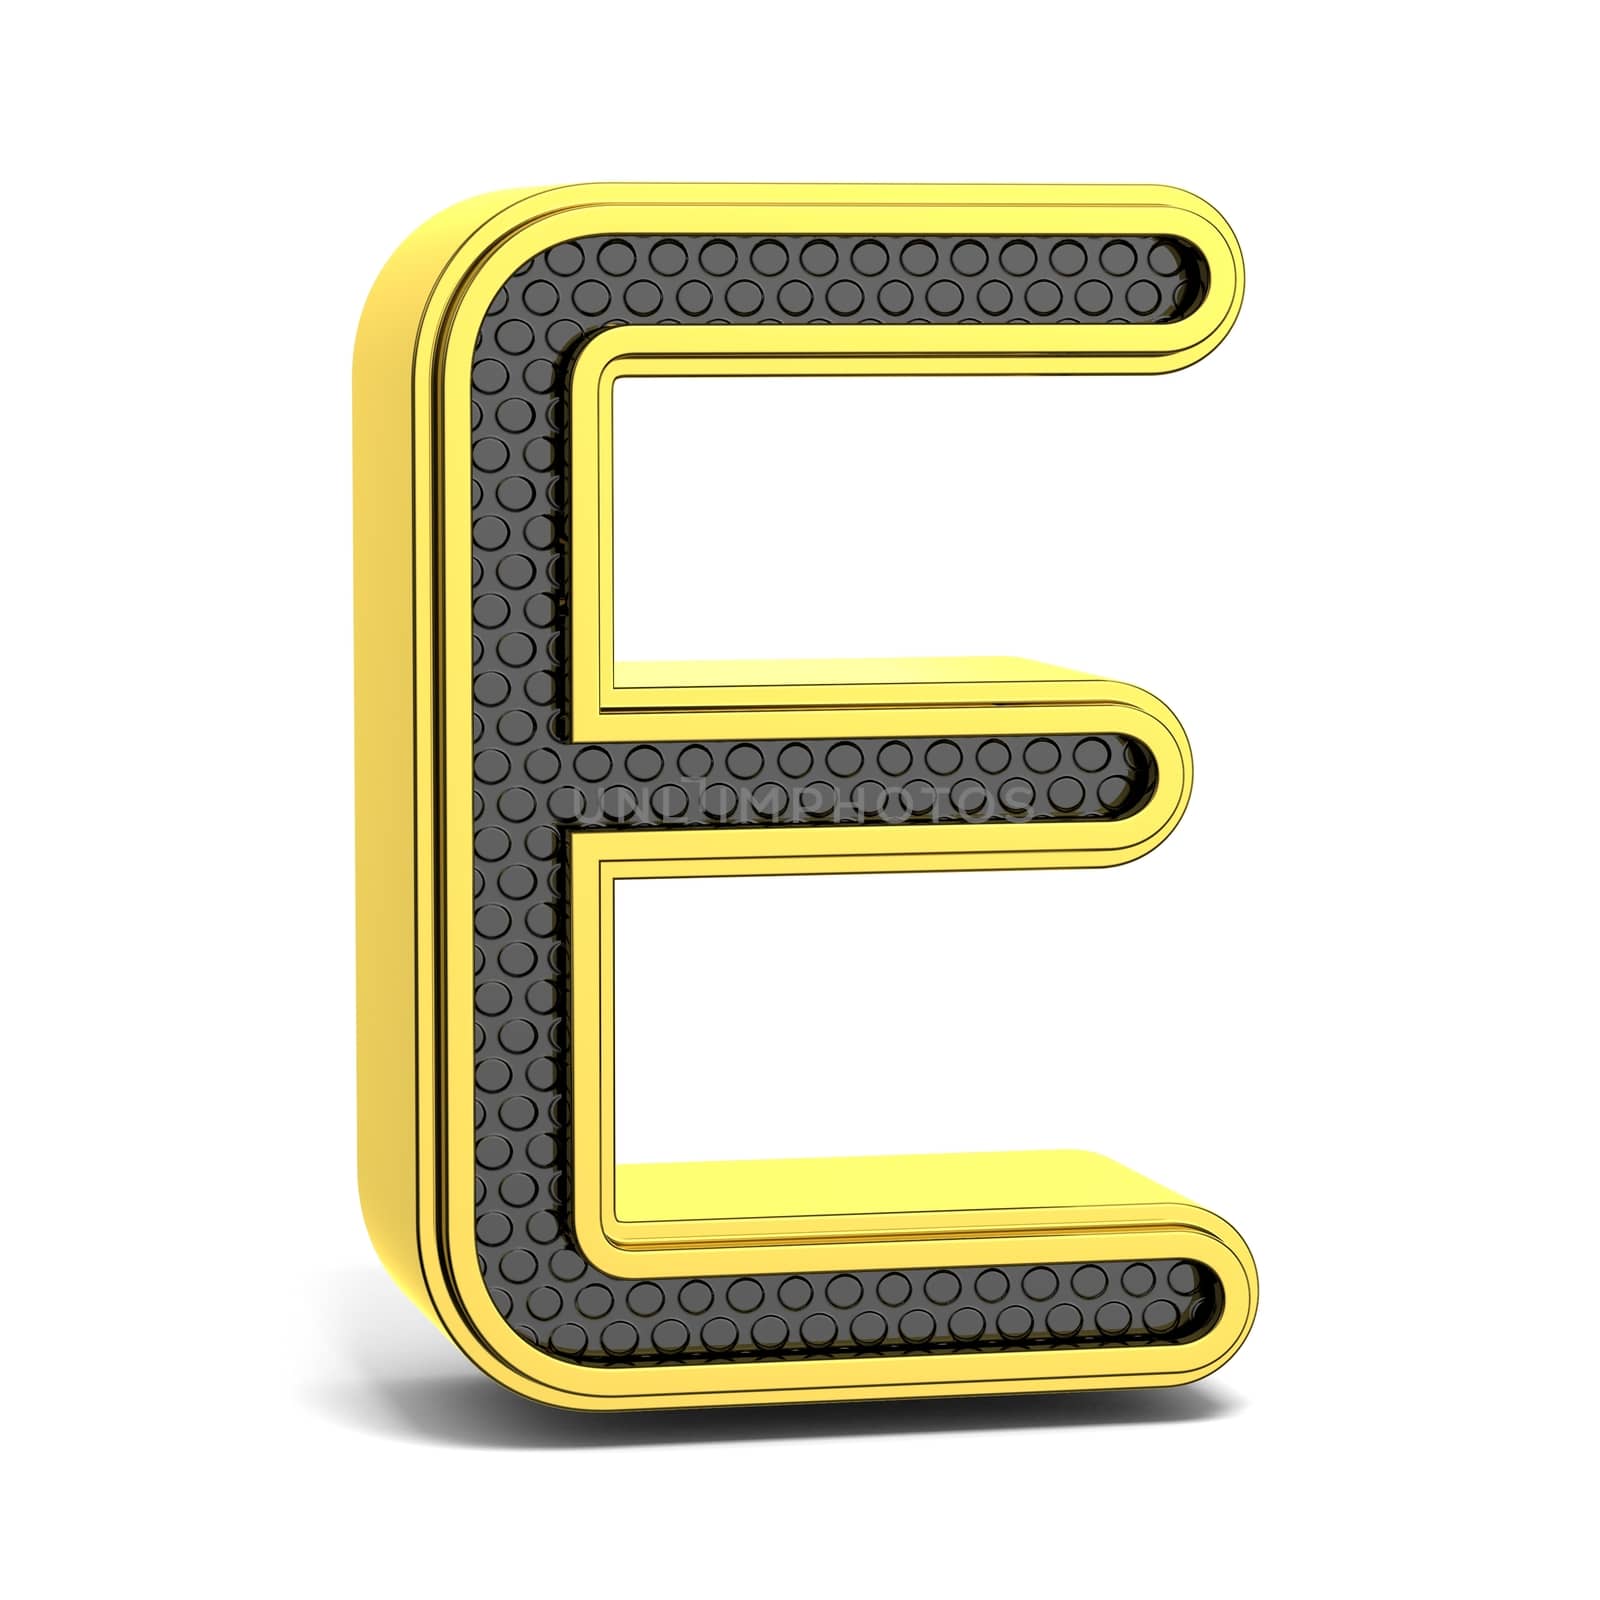 Golden and black round alphabet. Letter E. 3D render illustration isolated on white background with soft shadow